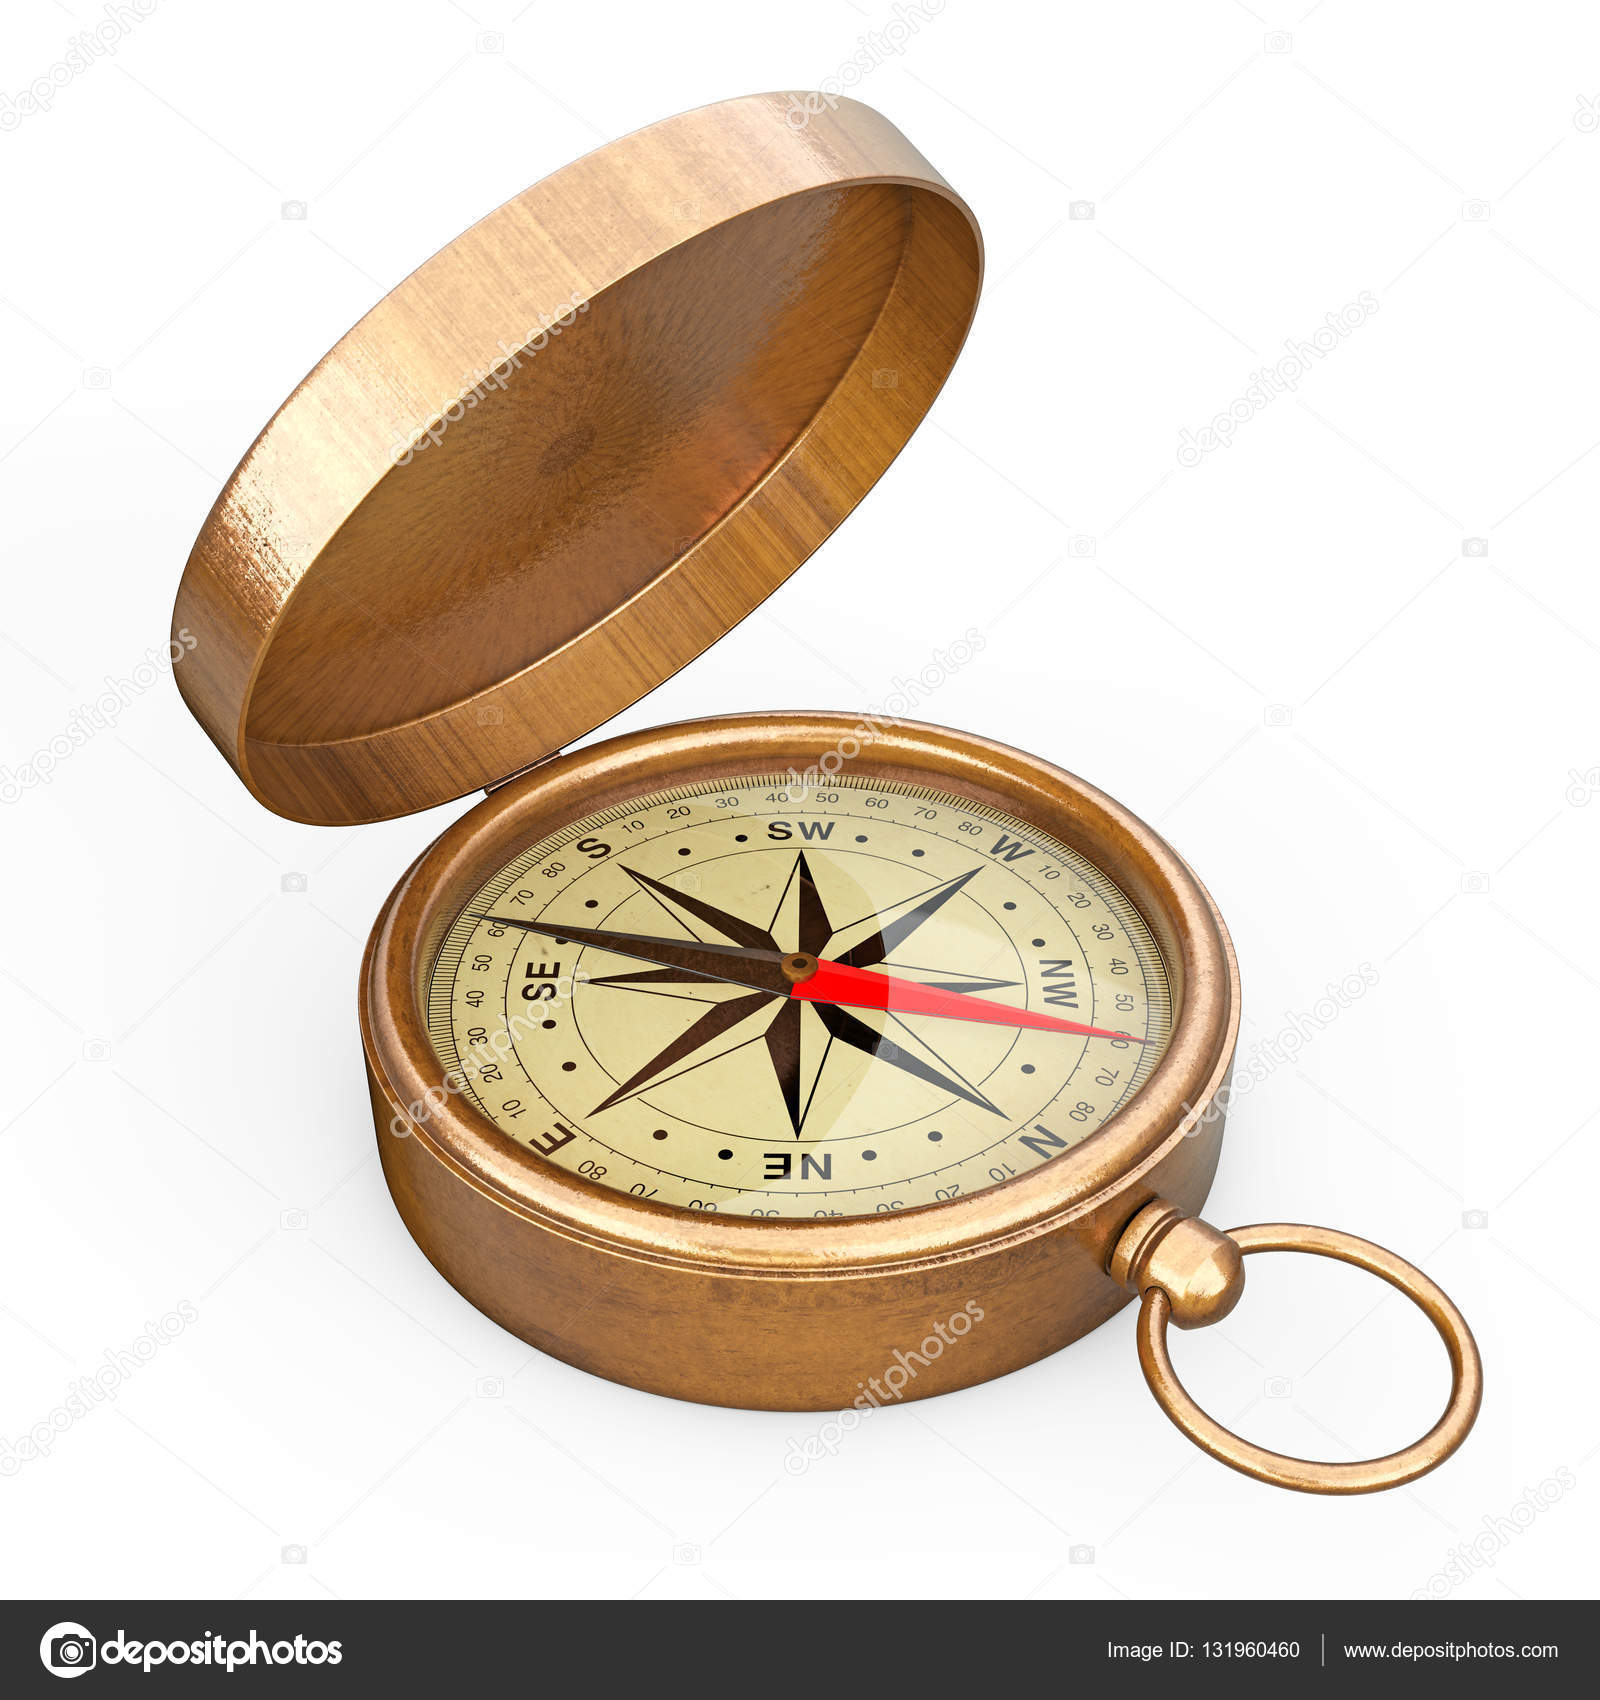 Antique Vintage Brass Compass. 3d Rendering Stock Photo by ©doomu